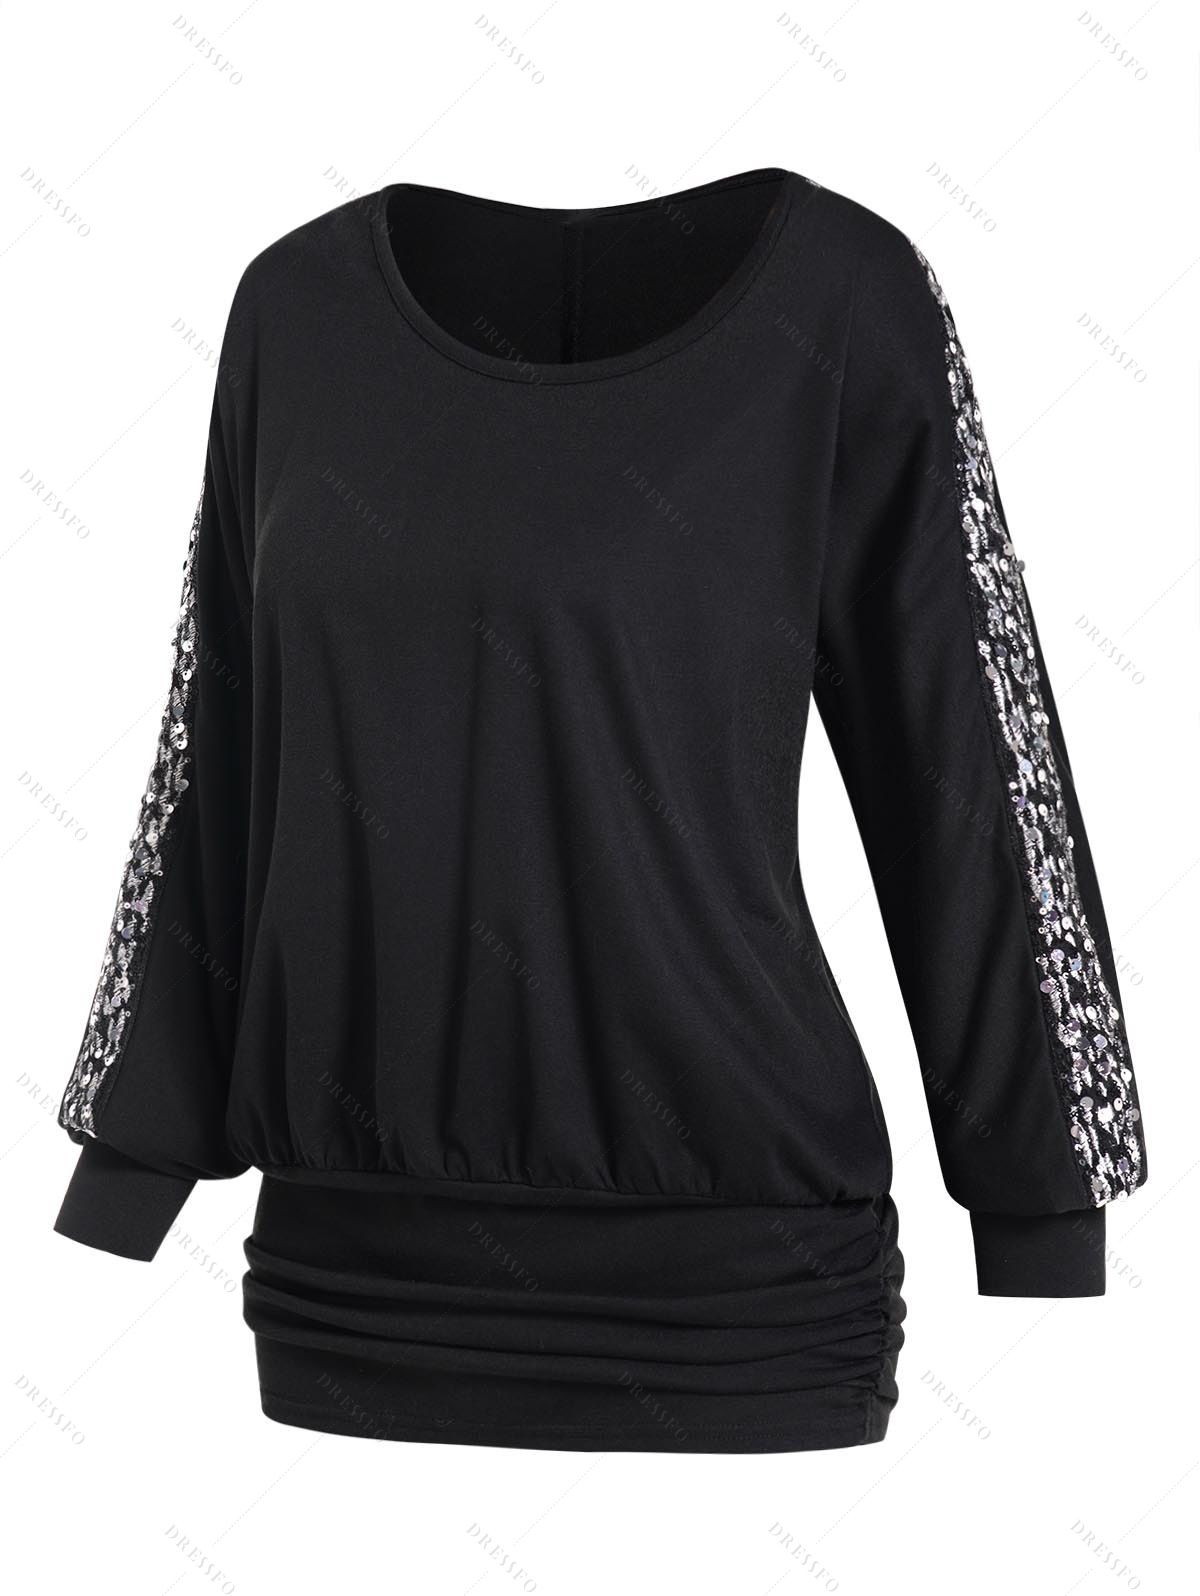 Sequined Panel Top Solid Color Ruched Round Neck Full Sleeve Long Top - BLACK XXL